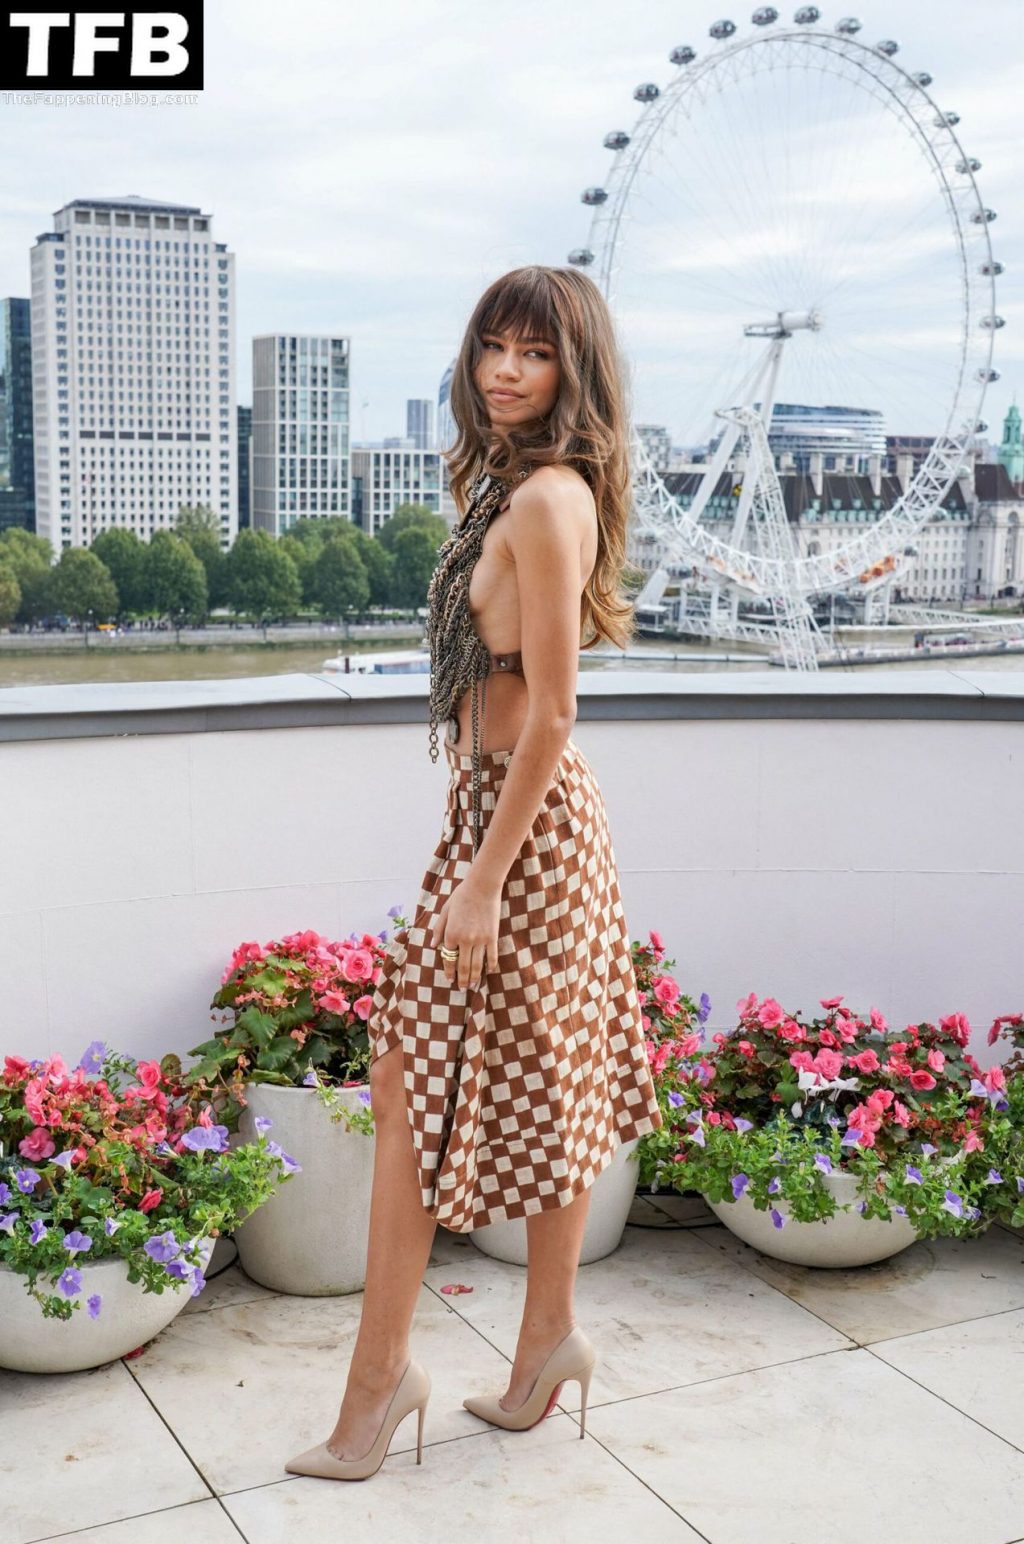 Zendaya Flashes Sideboob in a Backless Top During London Film Festival (24 Photos)